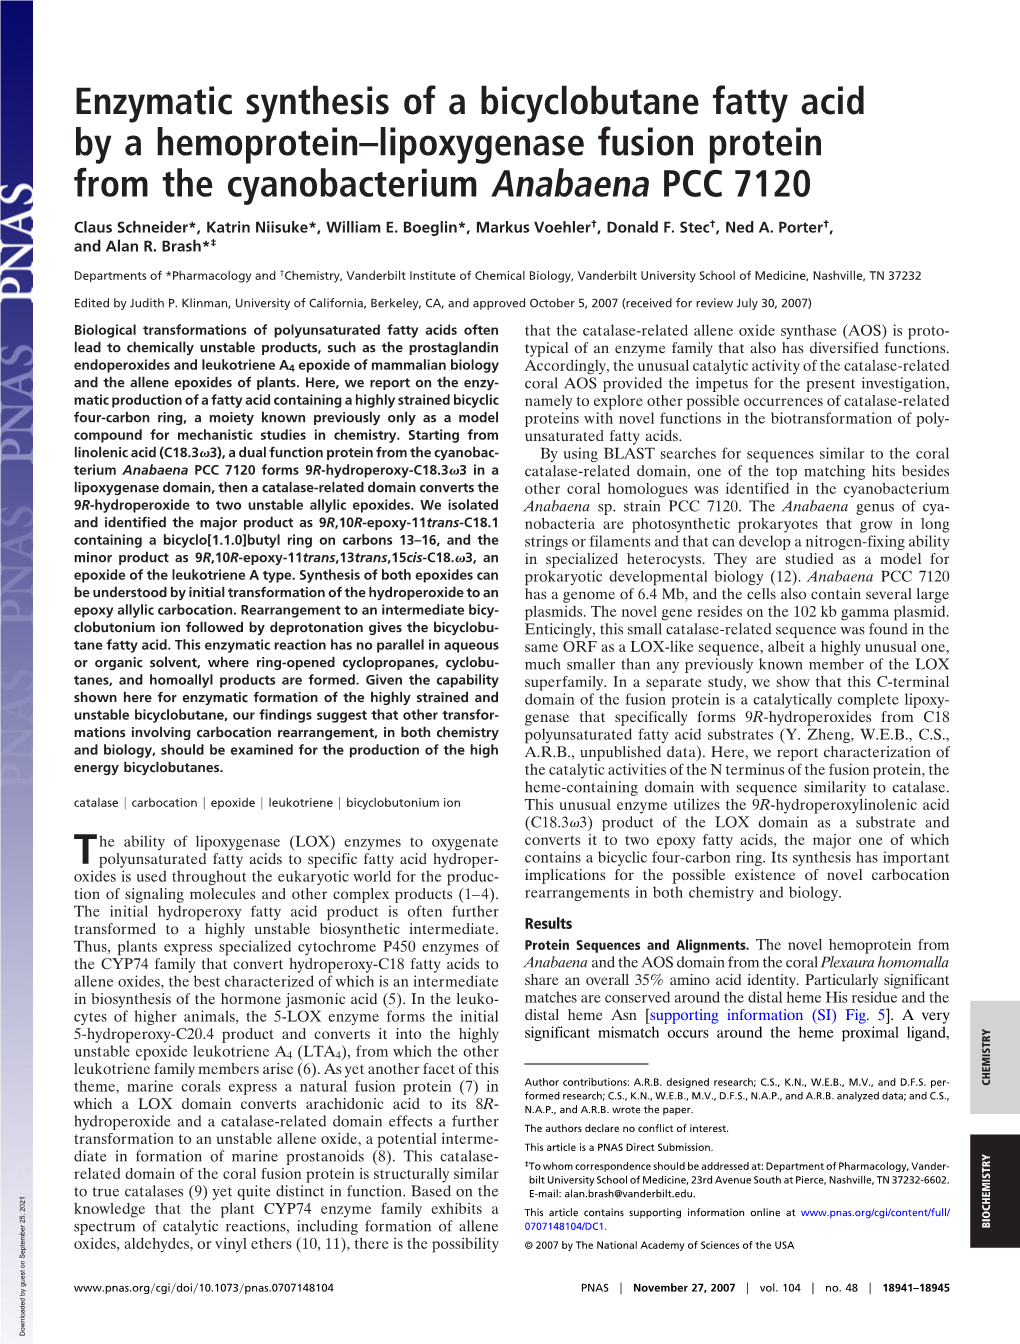 Enzymatic Synthesis of a Bicyclobutane Fatty Acid by a Hemoprotein–Lipoxygenase Fusion Protein from the Cyanobacterium Anabaena PCC 7120